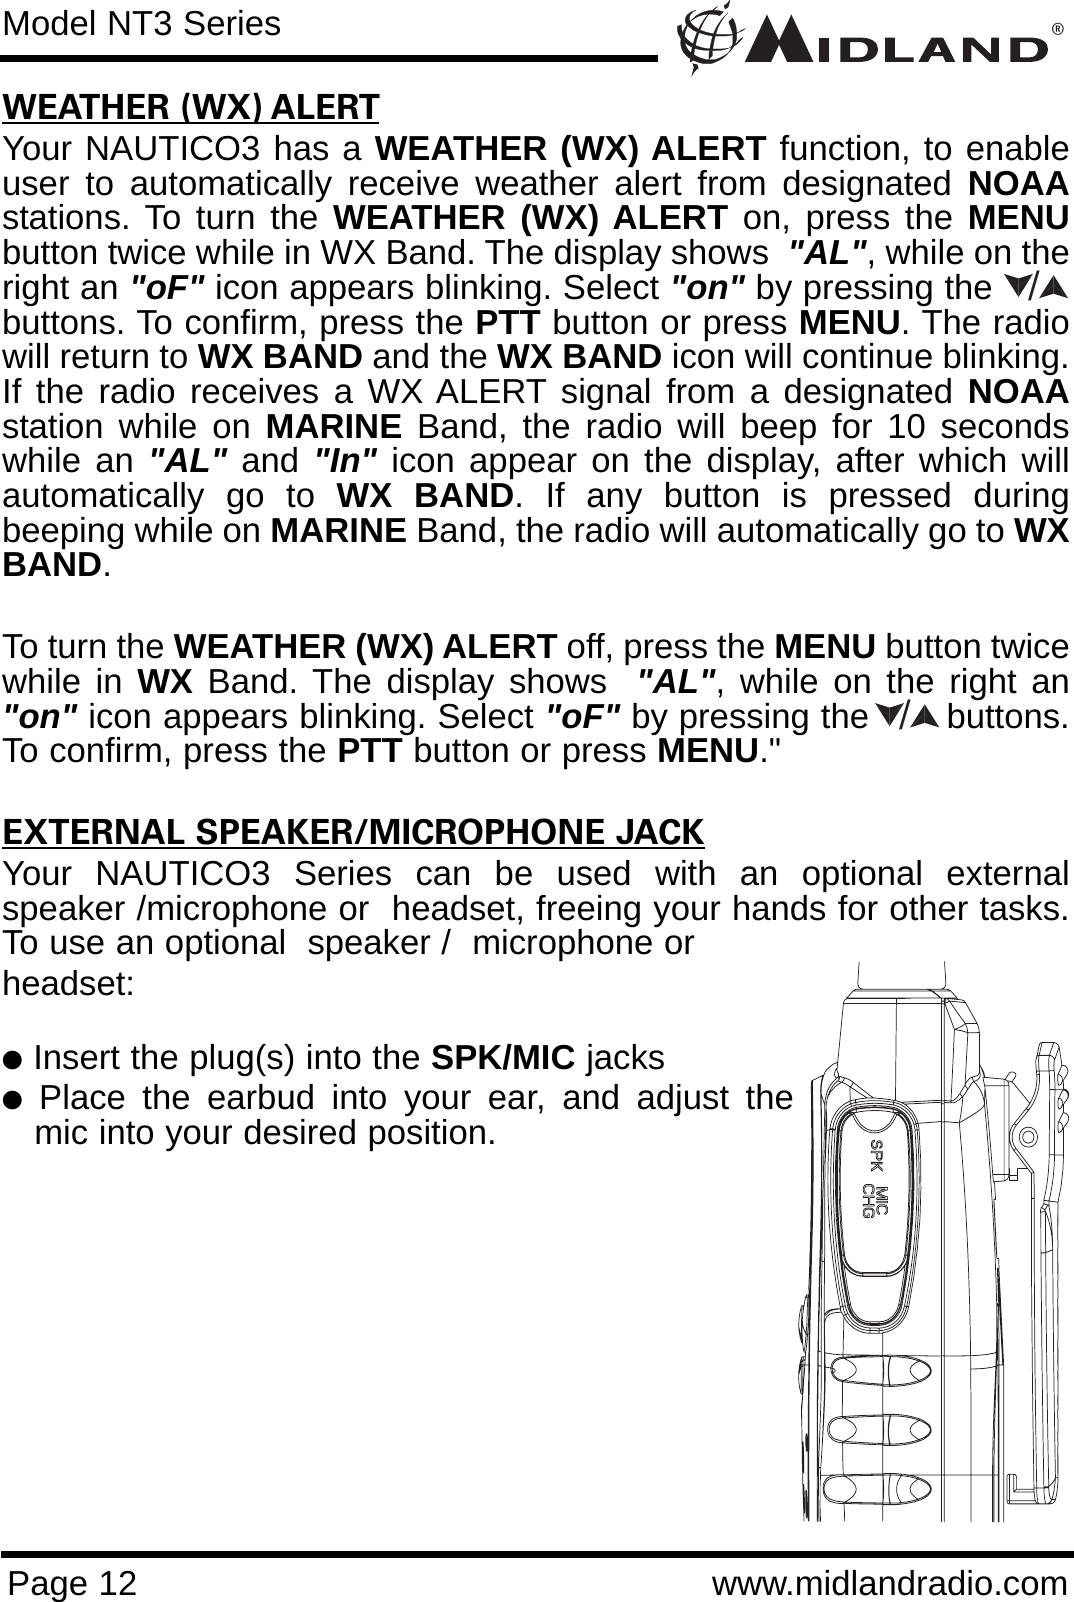 ®Page 12 www.midlandradio.comWEATHER (WX) ALERTYour NAUTICO3 has a WEATHER (WX) ALERT function, to enableuser to automatically receive weather alert from designated NOAAstations. To turn the WEATHER (WX) ALERT on, press the MENUbutton twice while in WX Band. The display shows  &quot;AL&quot;, while on theright an &quot;oF&quot; icon appears blinking. Select &quot;on&quot; by pressing the      buttons. To confirm, press the PTT button or press MENU. The radiowill return to WX BAND and the WX BAND icon will continue blinking.If the radio receives a WX ALERT signal from a designated NOAAstation while on MARINE Band, the radio will beep for 10 secondswhile an &quot;AL&quot; and &quot;In&quot; icon appear on the display, after which willautomatically go to WX BAND. If any button is pressed duringbeeping while on MARINE Band, the radio will automatically go to WXBAND.To turn the WEATHER (WX) ALERT off, press the MENU button twicewhile in WX Band. The display shows  &quot;AL&quot;, while on the right an&quot;on&quot; icon appears blinking. Select &quot;oF&quot; by pressing the       buttons.To confirm, press the PTT button or press MENU.&quot;EXTERNAL SPEAKER/MICROPHONE JACKYour NAUTICO3 Series can be used with an optional externalspeaker /microphone or  headset, freeing your hands for other tasks.To use an optional  speaker /  microphone or headset:lInsert the plug(s) into the SPK/MIC jackslPlace the earbud into your ear, and adjust themic into your desired position.Model NT3 Series//